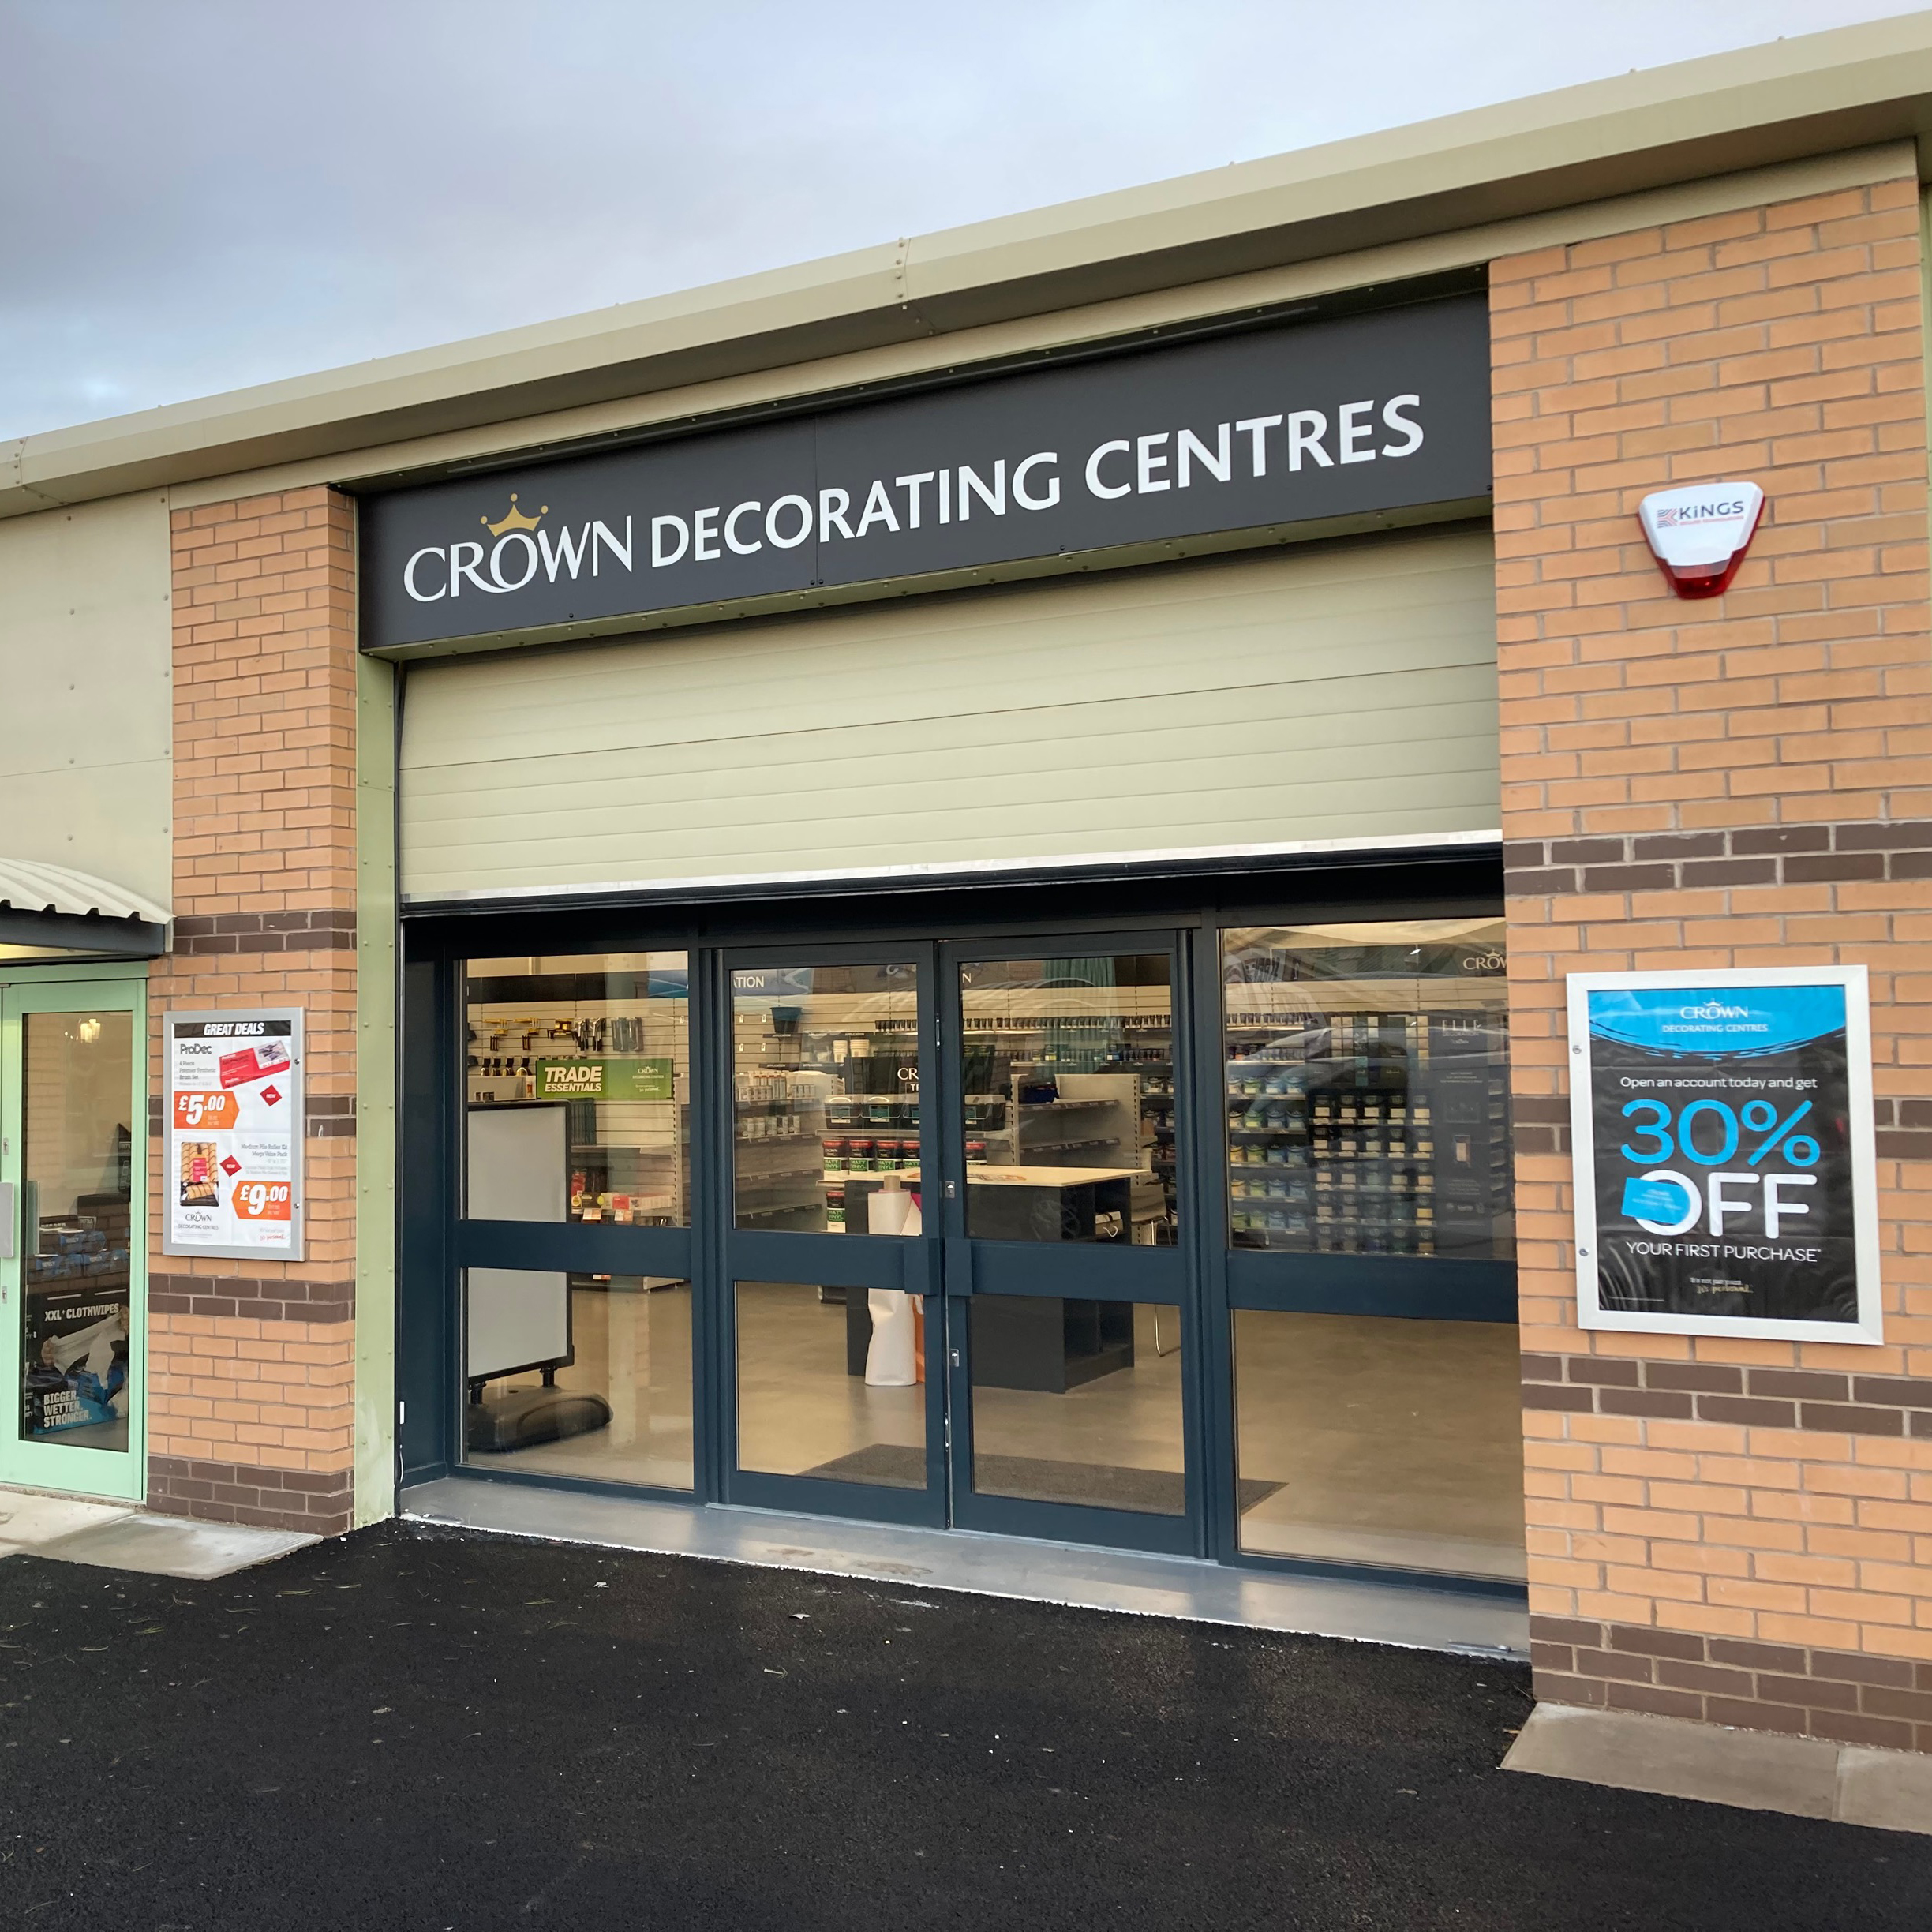 New Crown Decorating Centre to open in Barrow